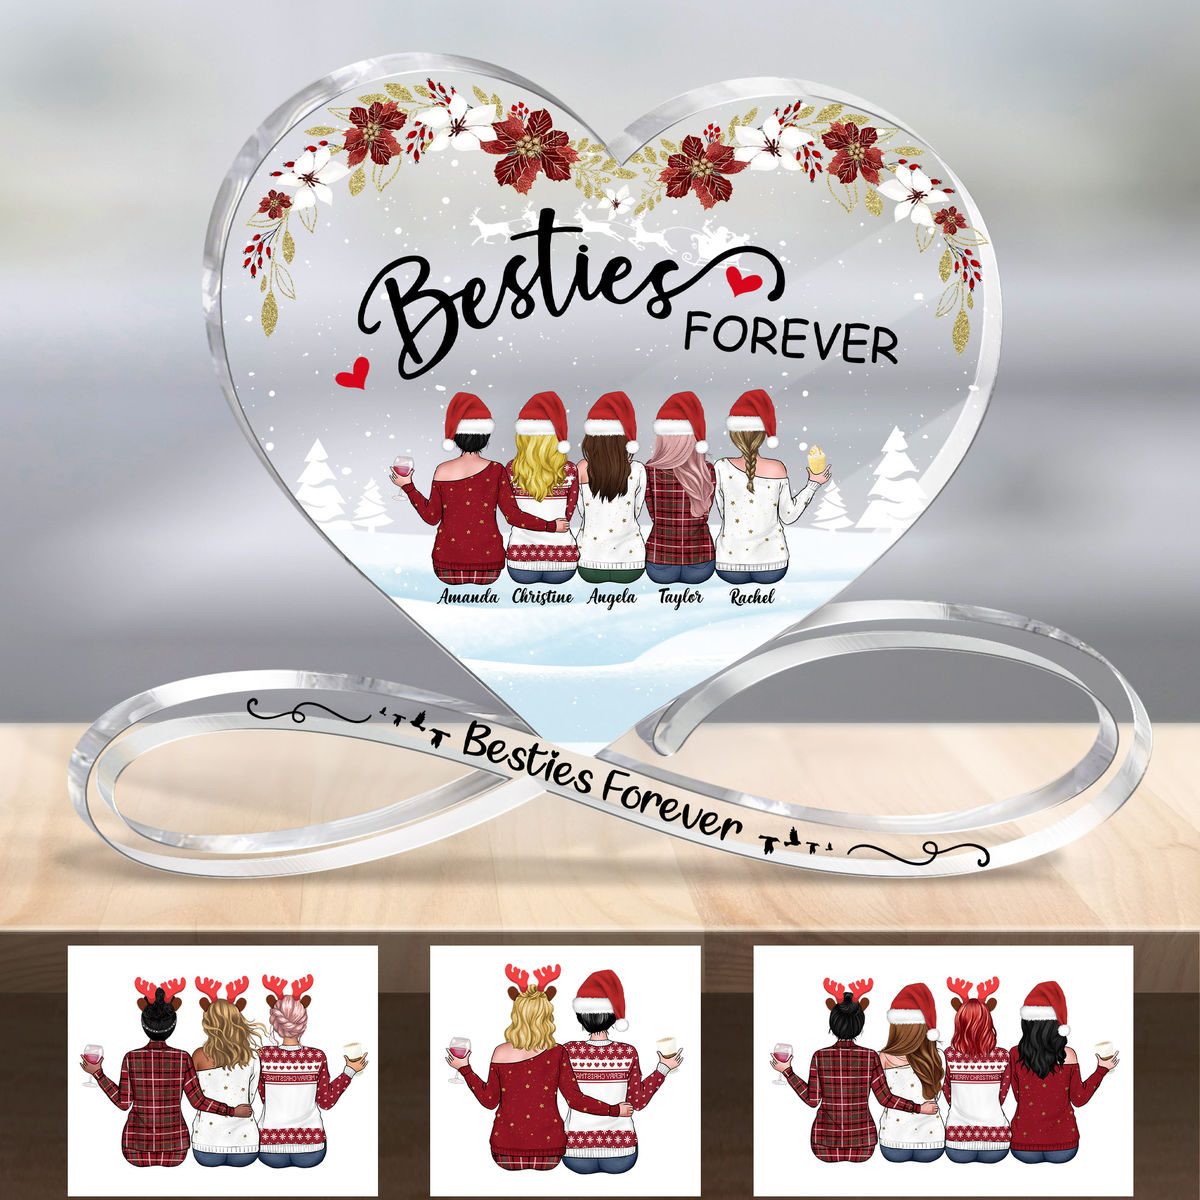 Besties - Personalized Heart Shaped Acrylic Plaque - Christmas - Besties Forever